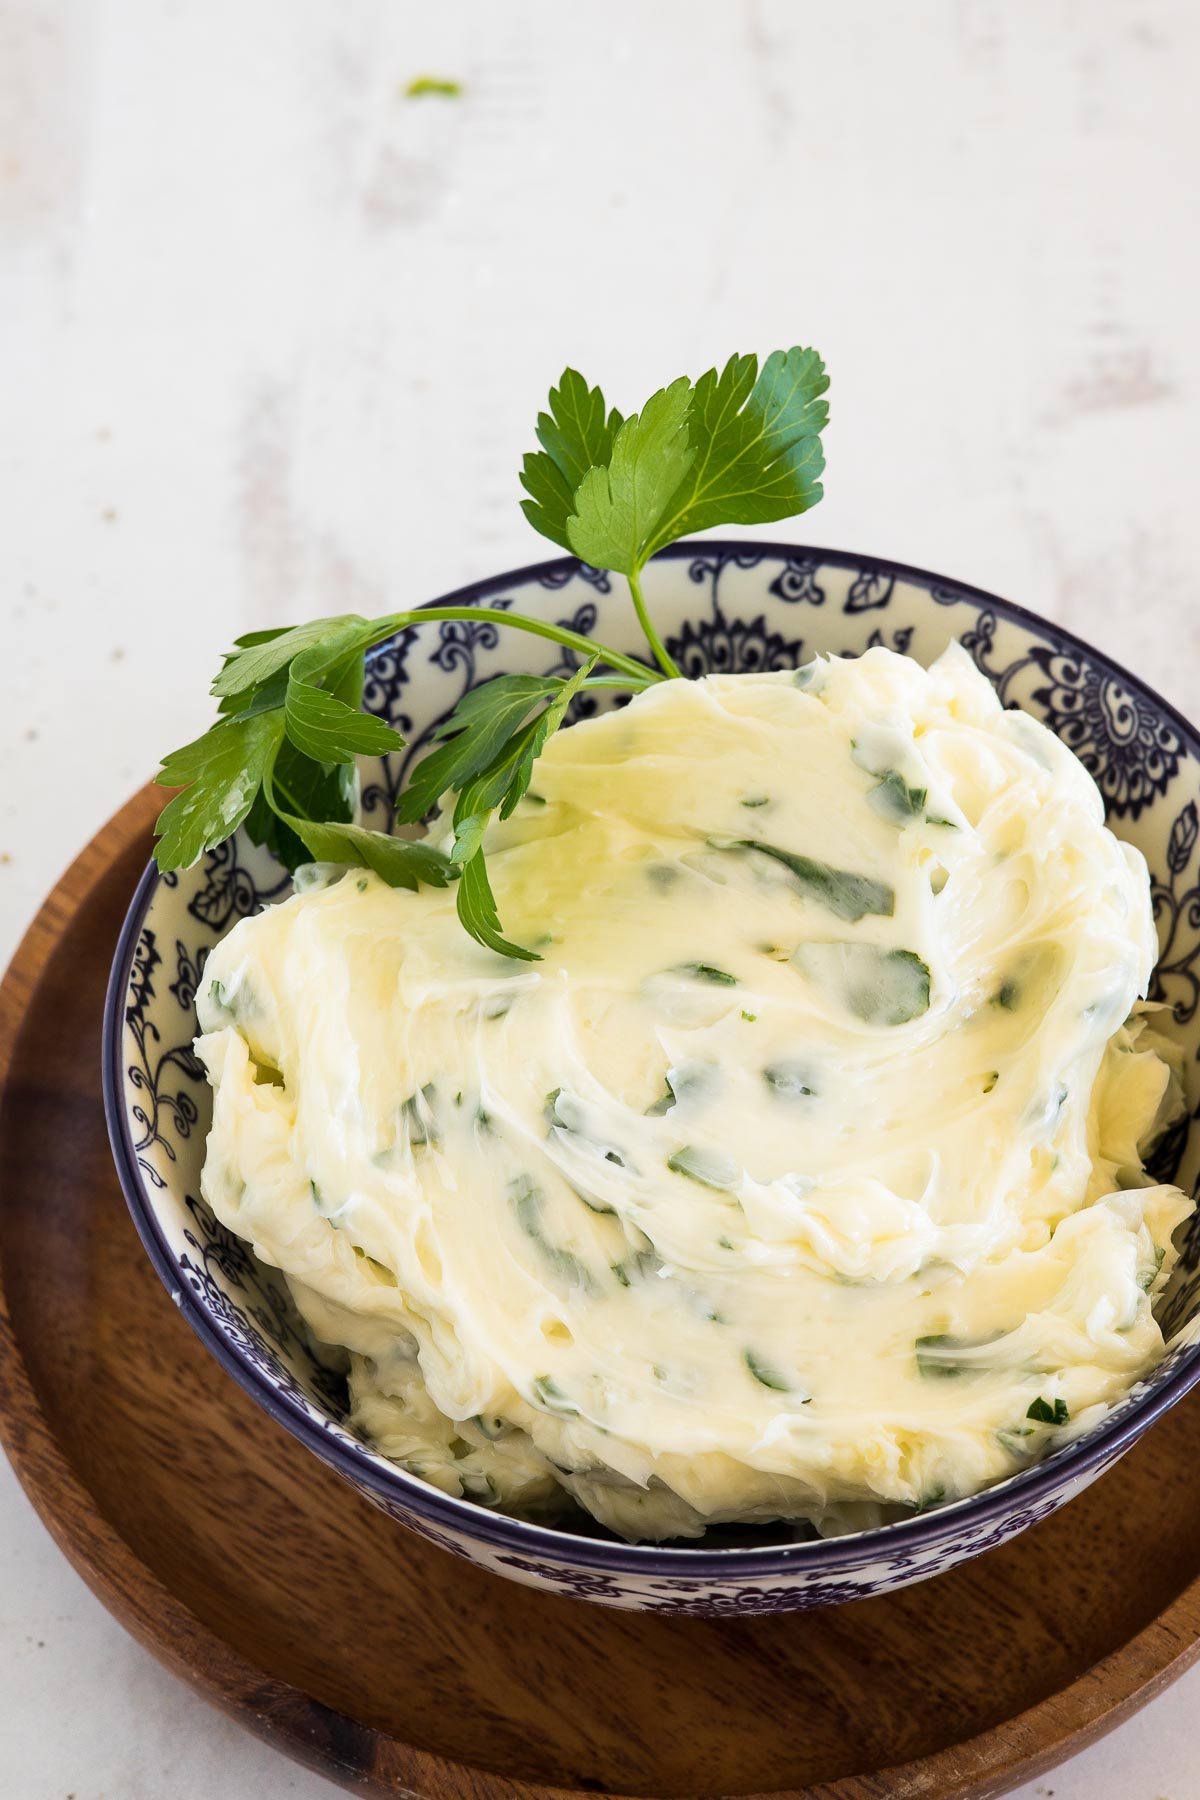 Butter with herbs and garlic in a bowl.